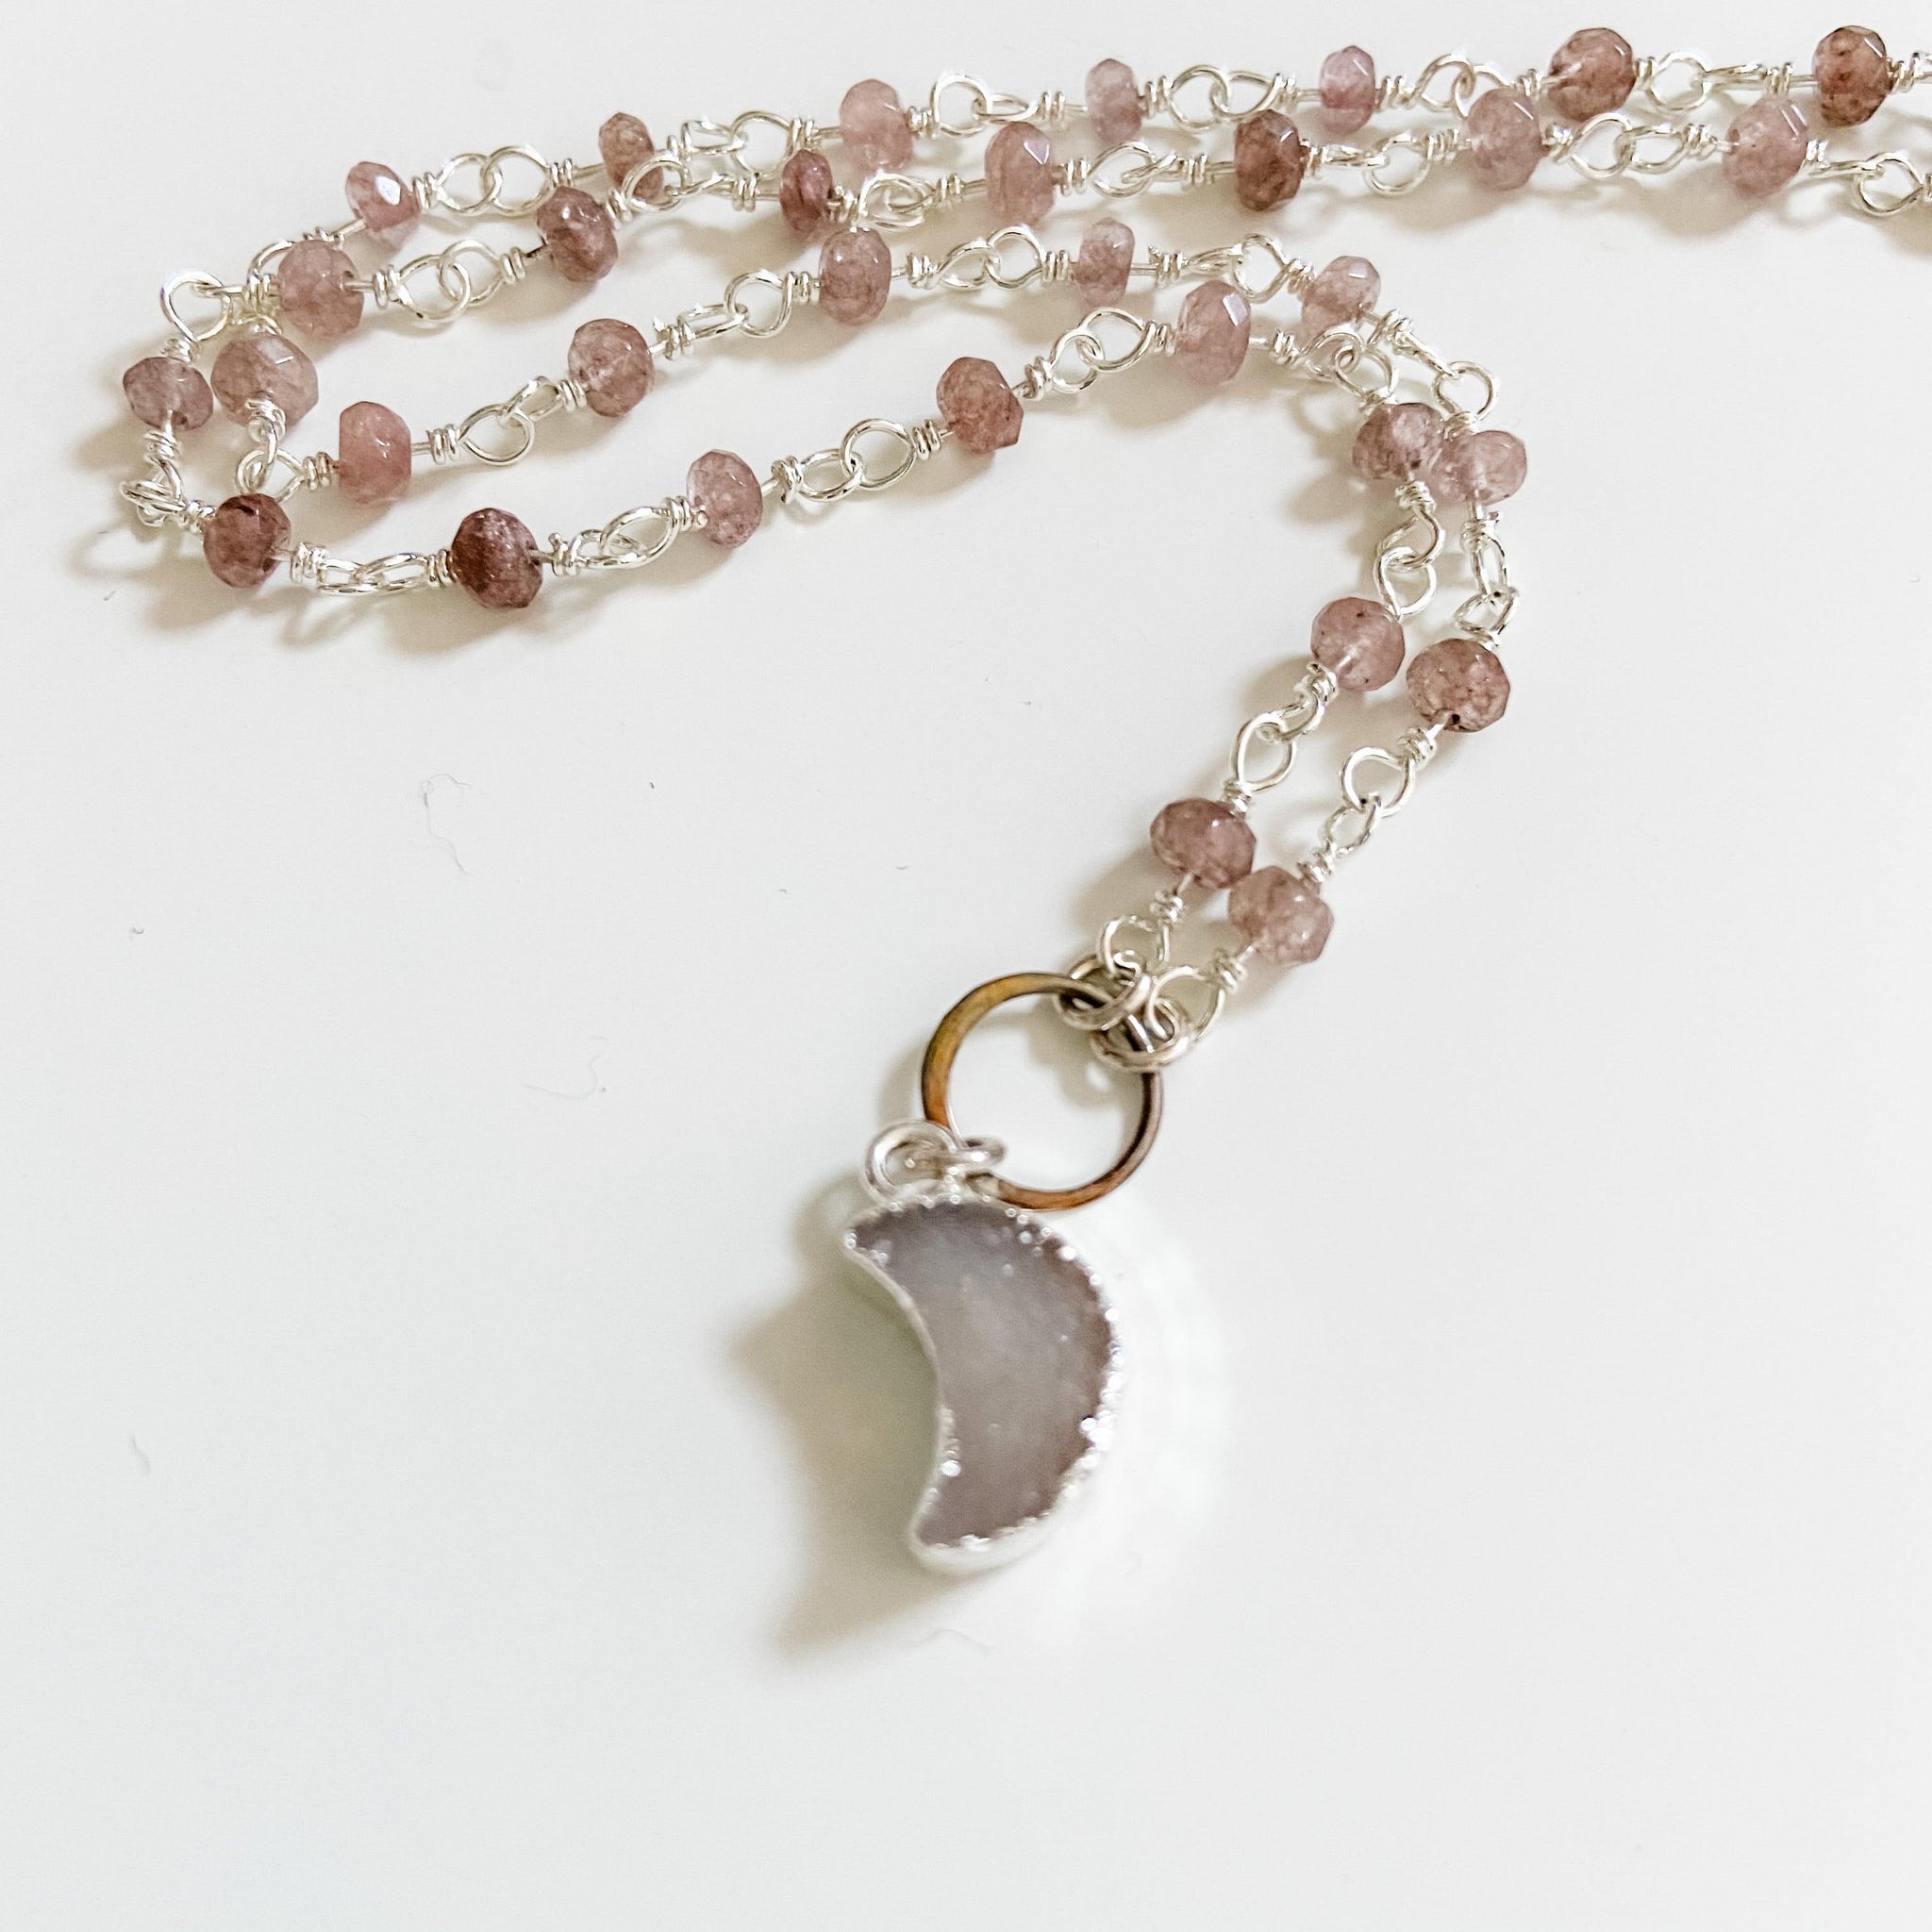 Druzy Quartz Mini Moon and Chocolate Moonstone with Sterling Silver Circlet Necklace Uni-T Necklace